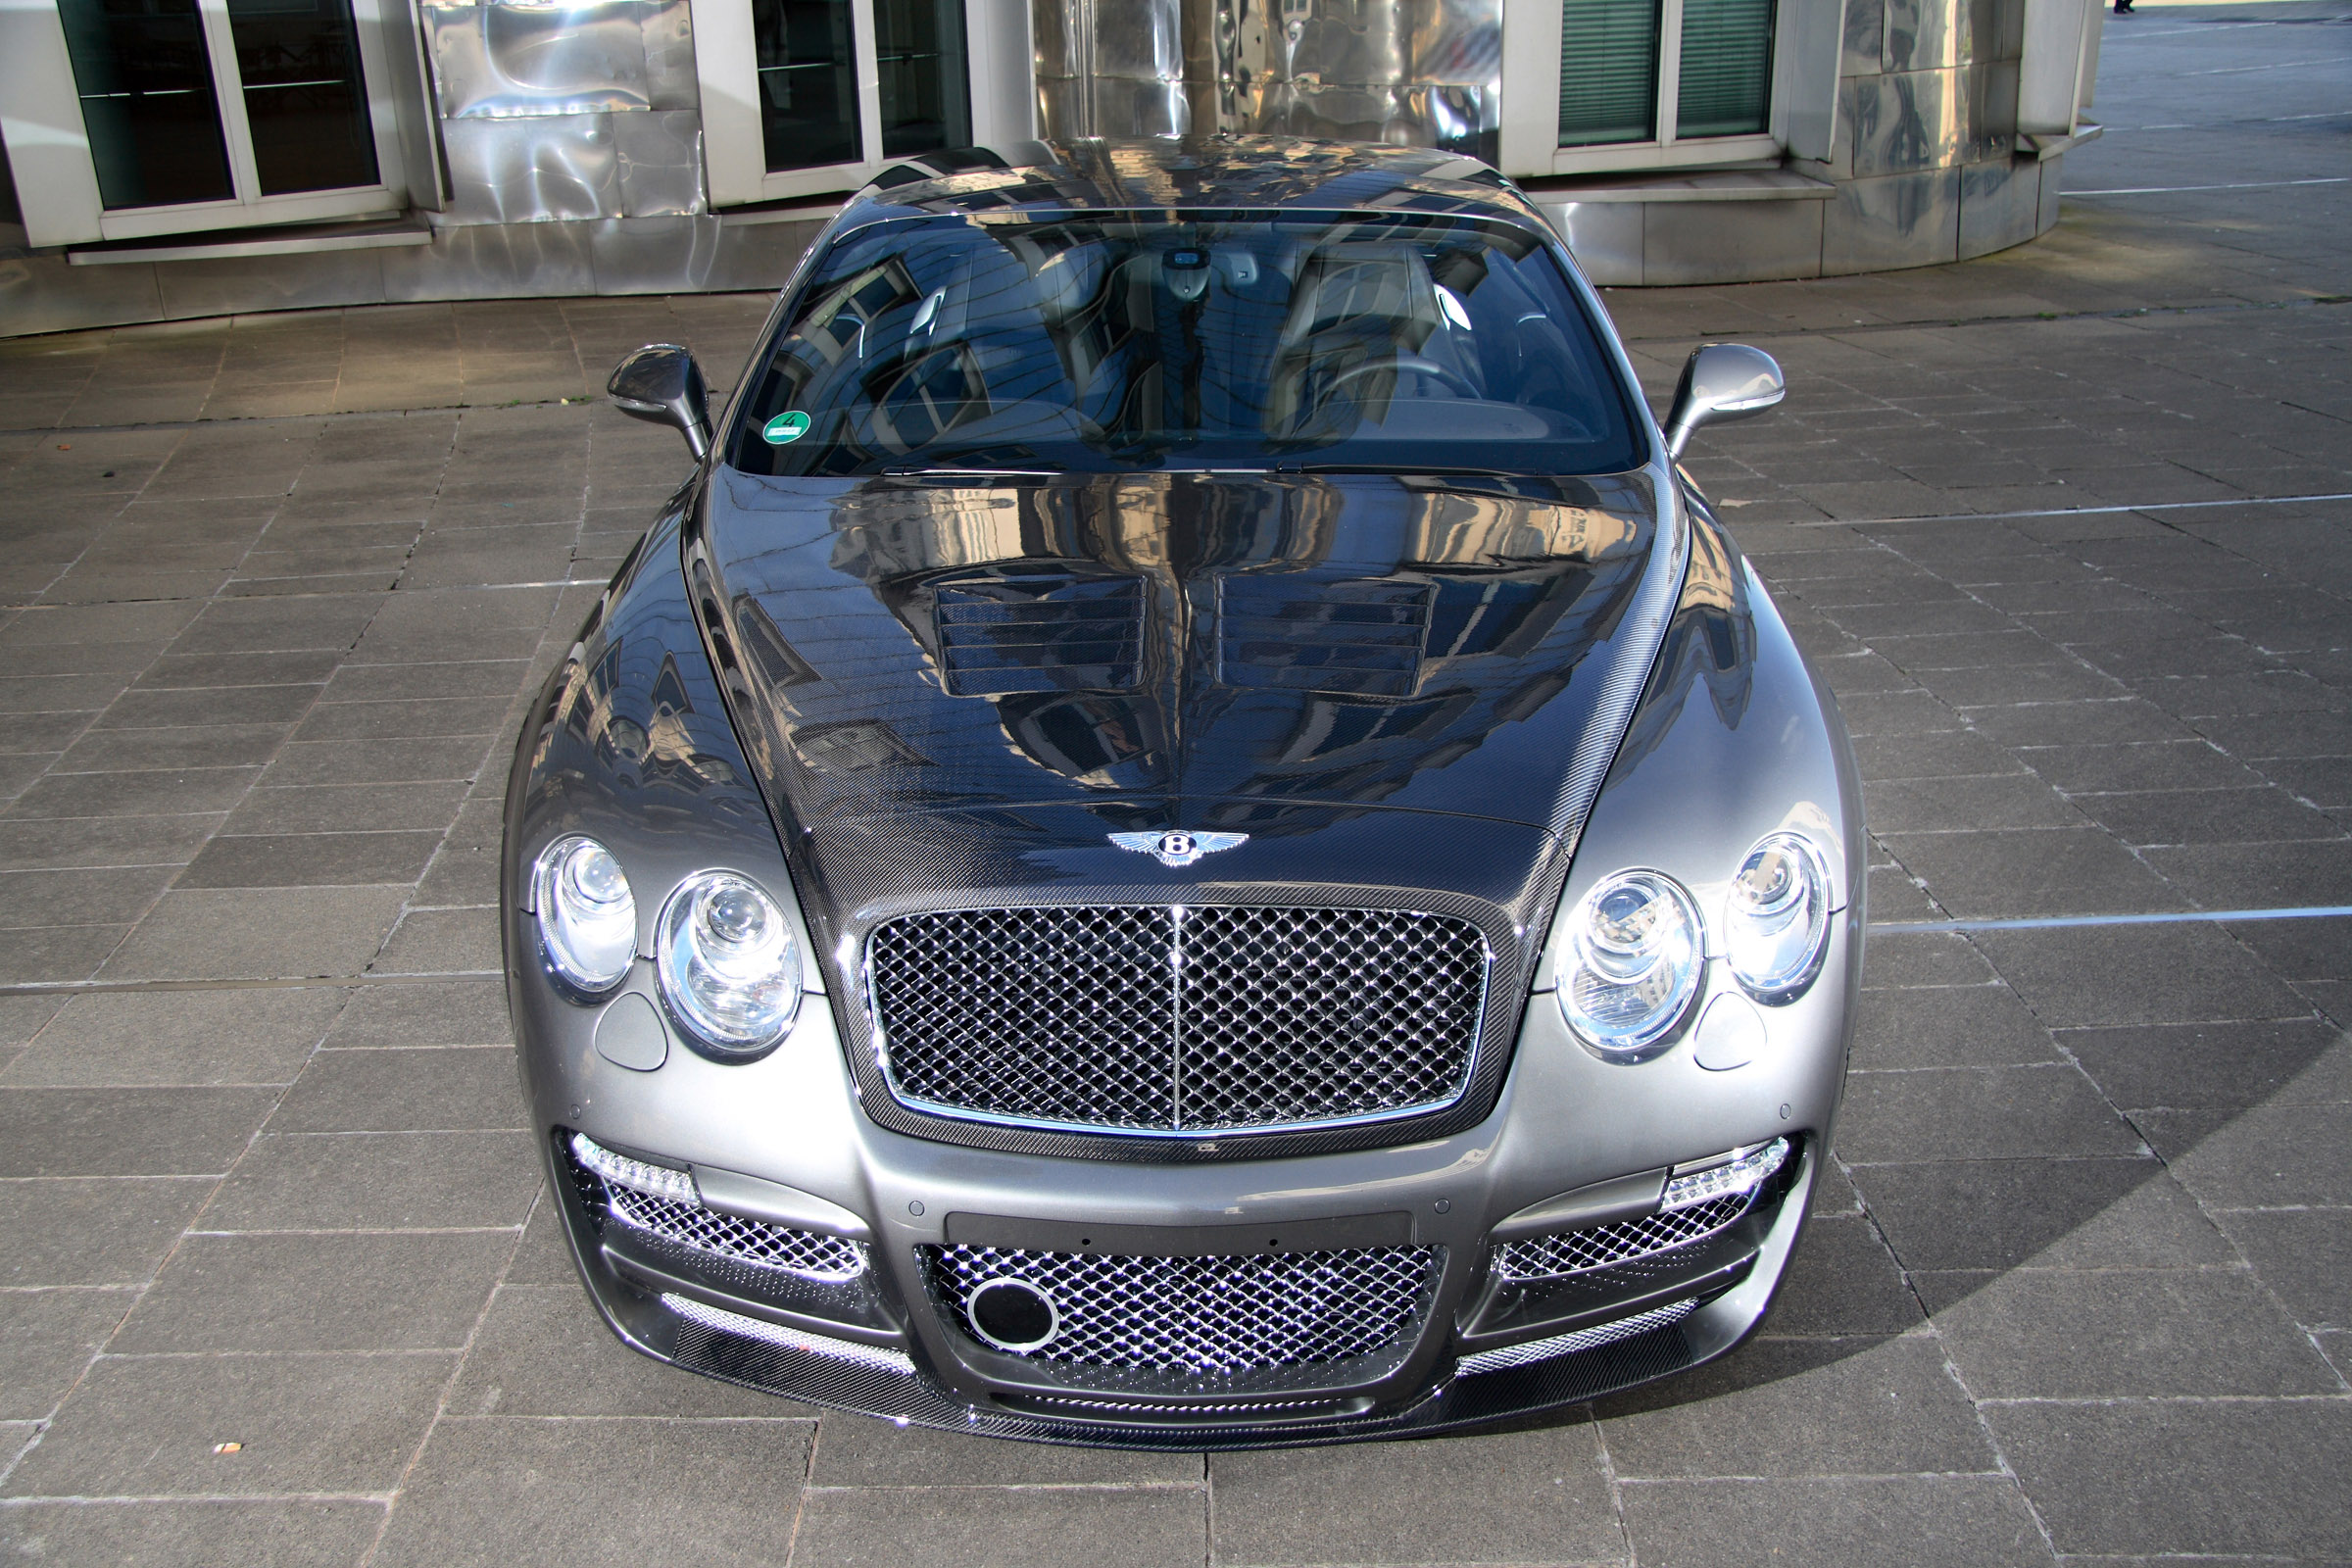 2010, Anderson germany, Bentley, G t, Speed, Elegance, Luxury, Coupe, Tuning Wallpaper